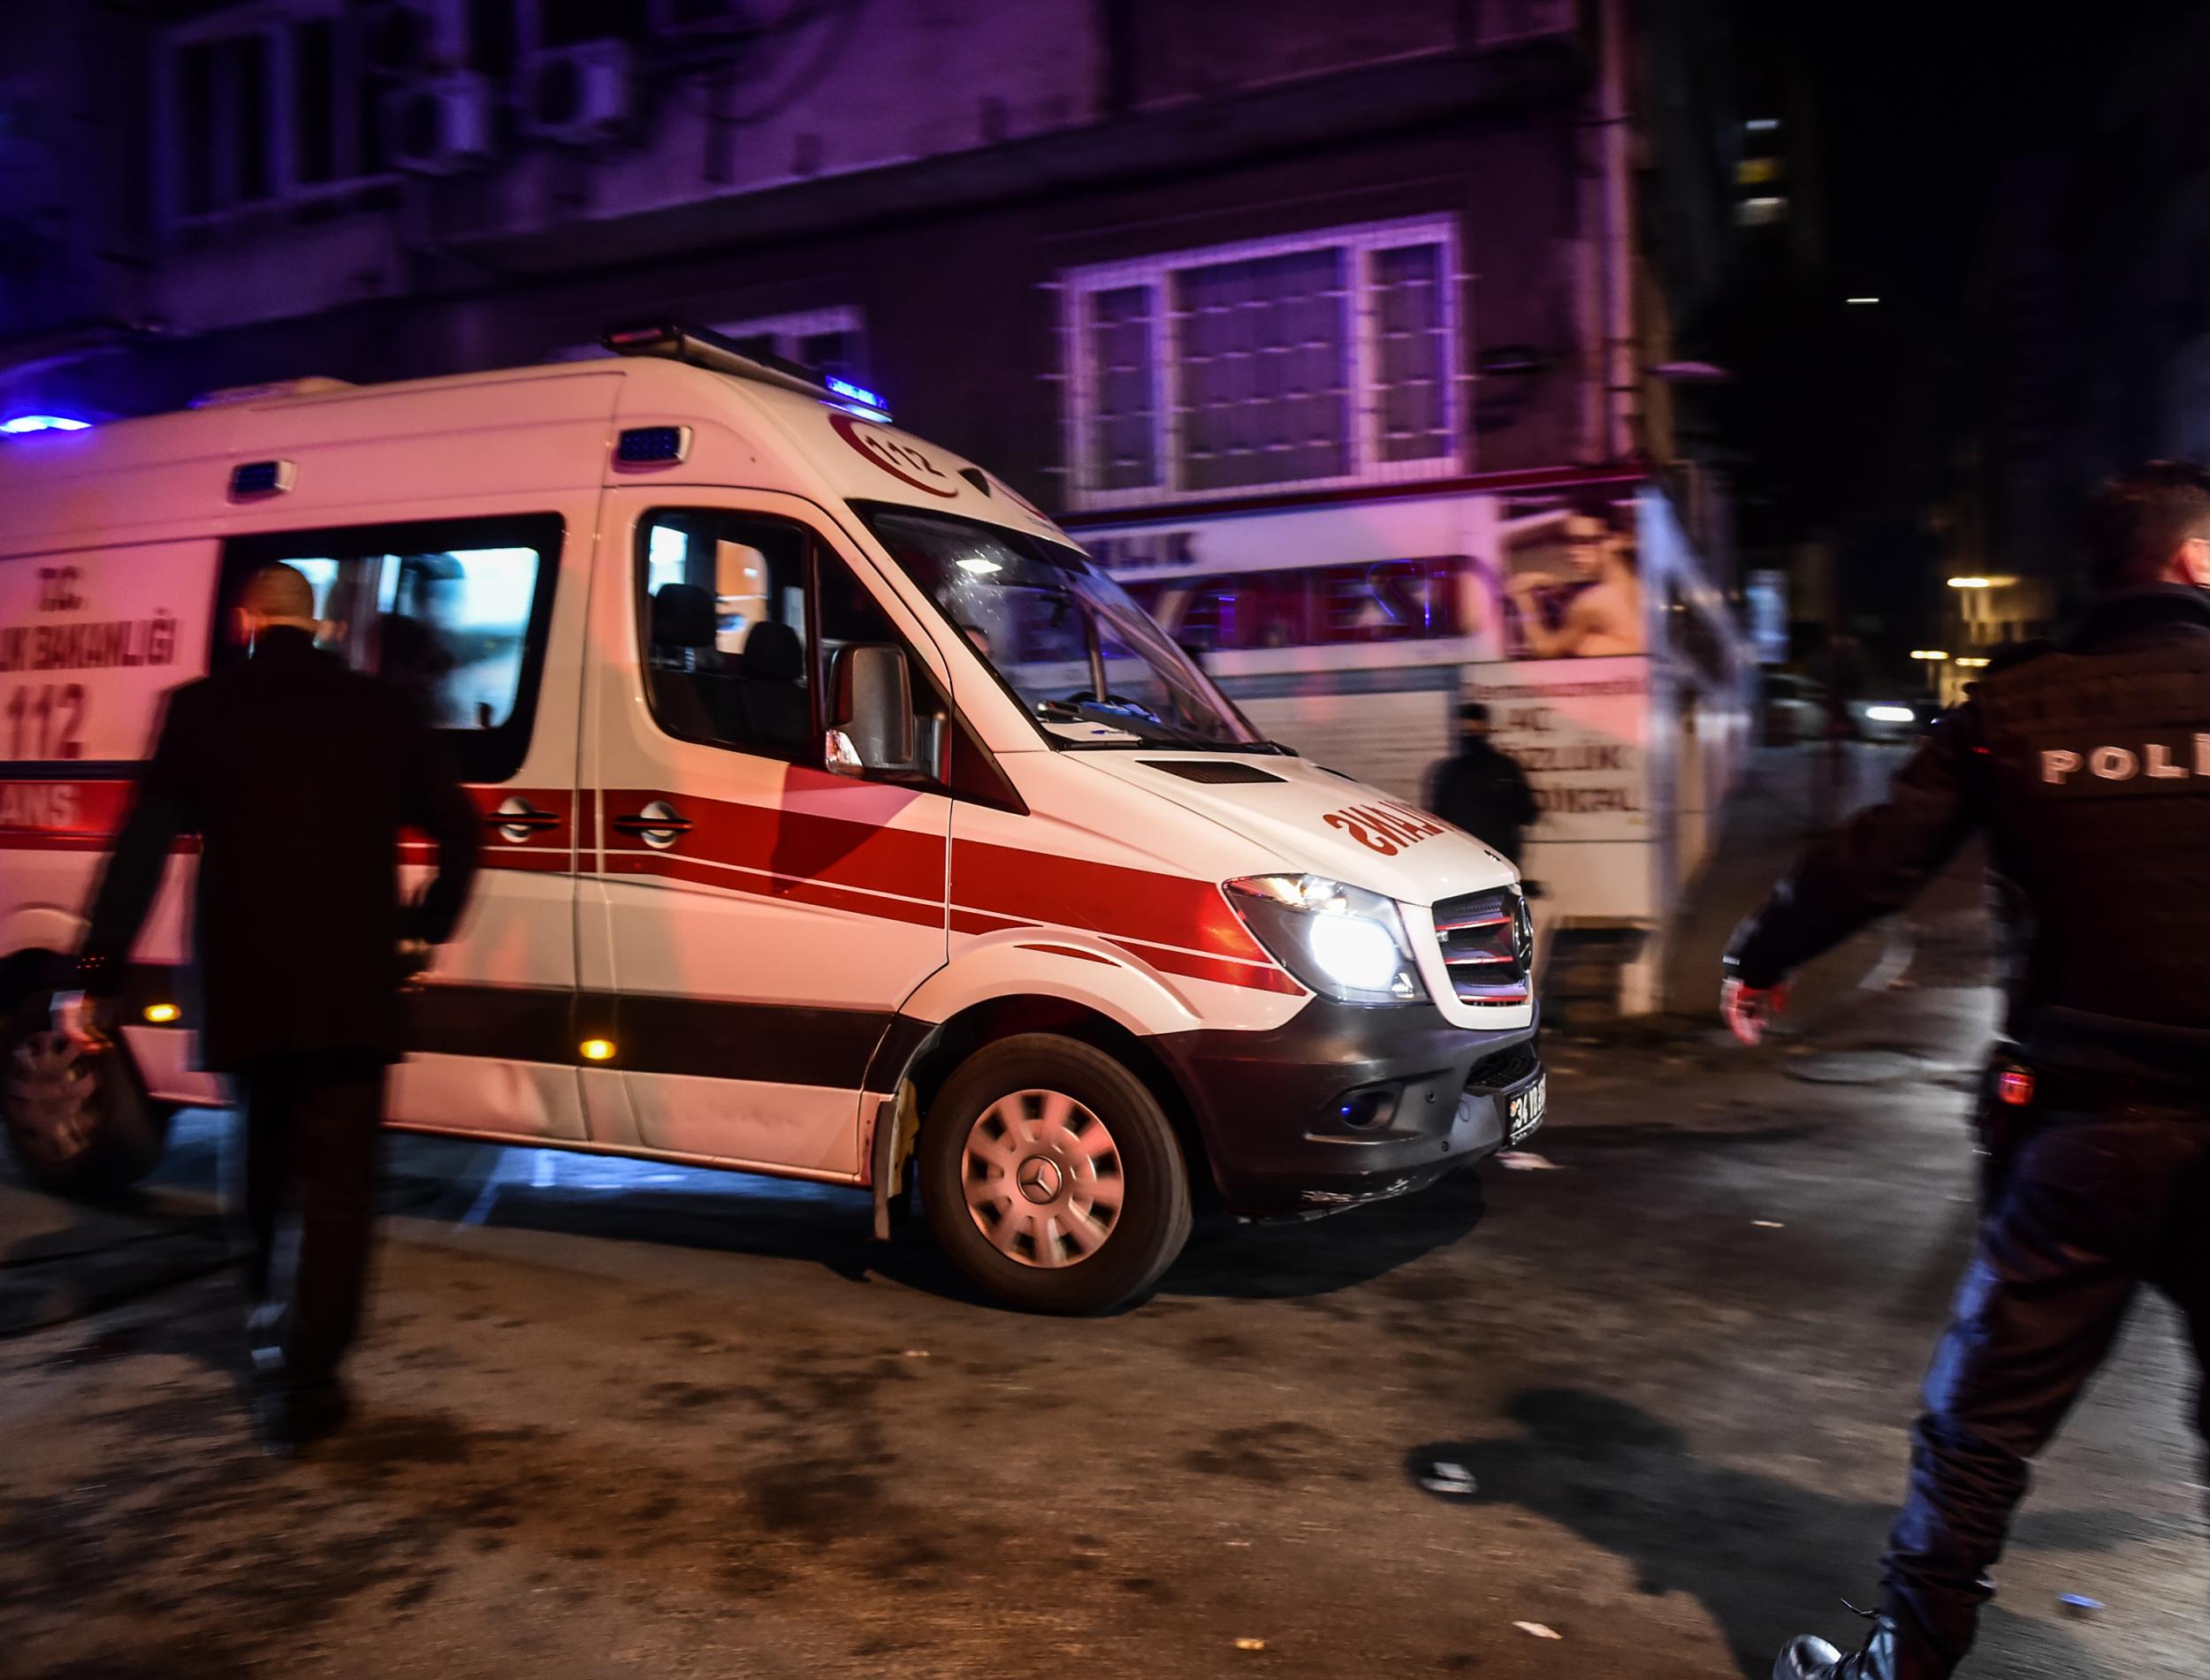 An ambulance arrives at a hospital in Istanbul